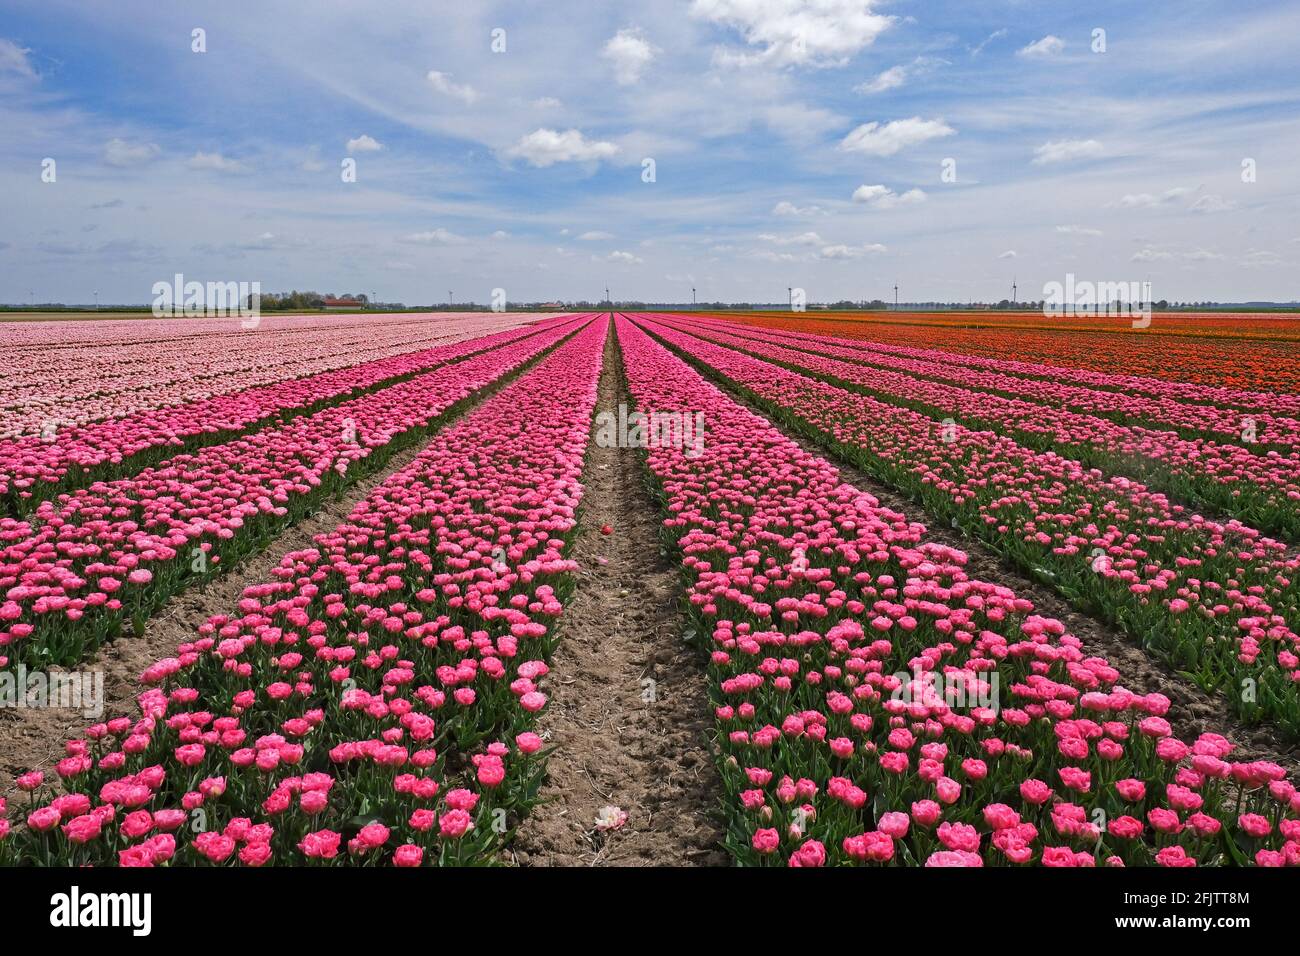 Rows of pink and red tulips in Dutch tulip field in spring at the Flevopolder, Flevoland province, the Netherlands Stock Photo